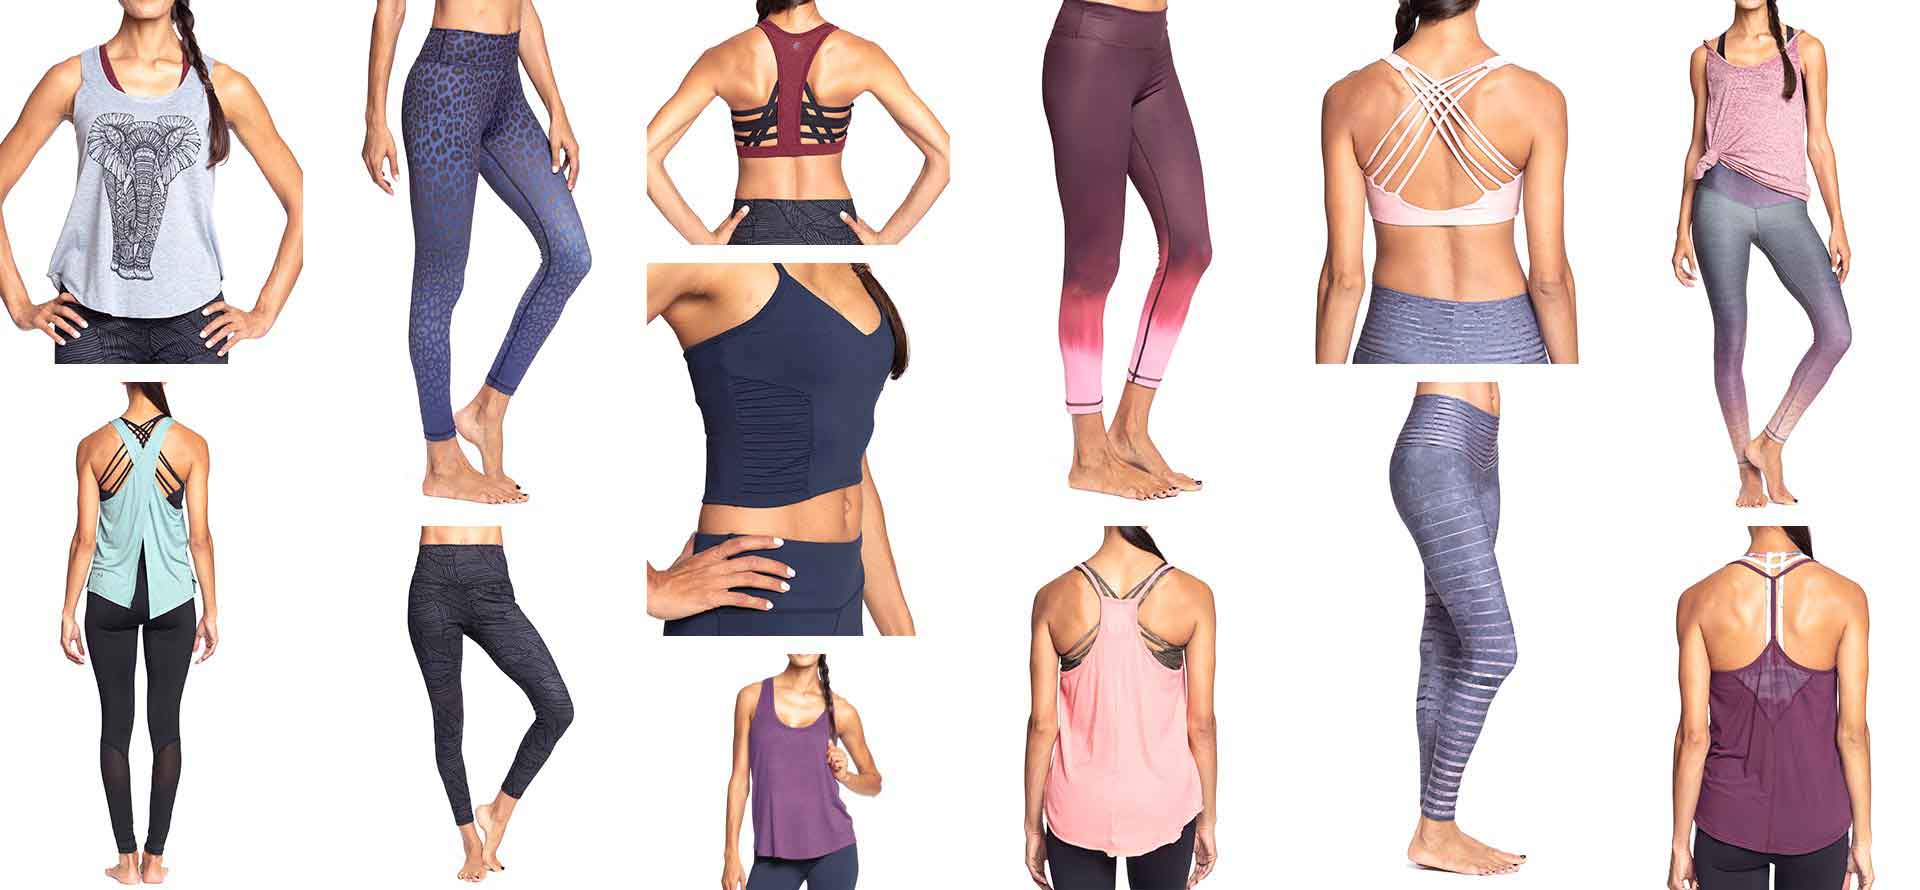 Premium Athleisure Outfits for 50% Off